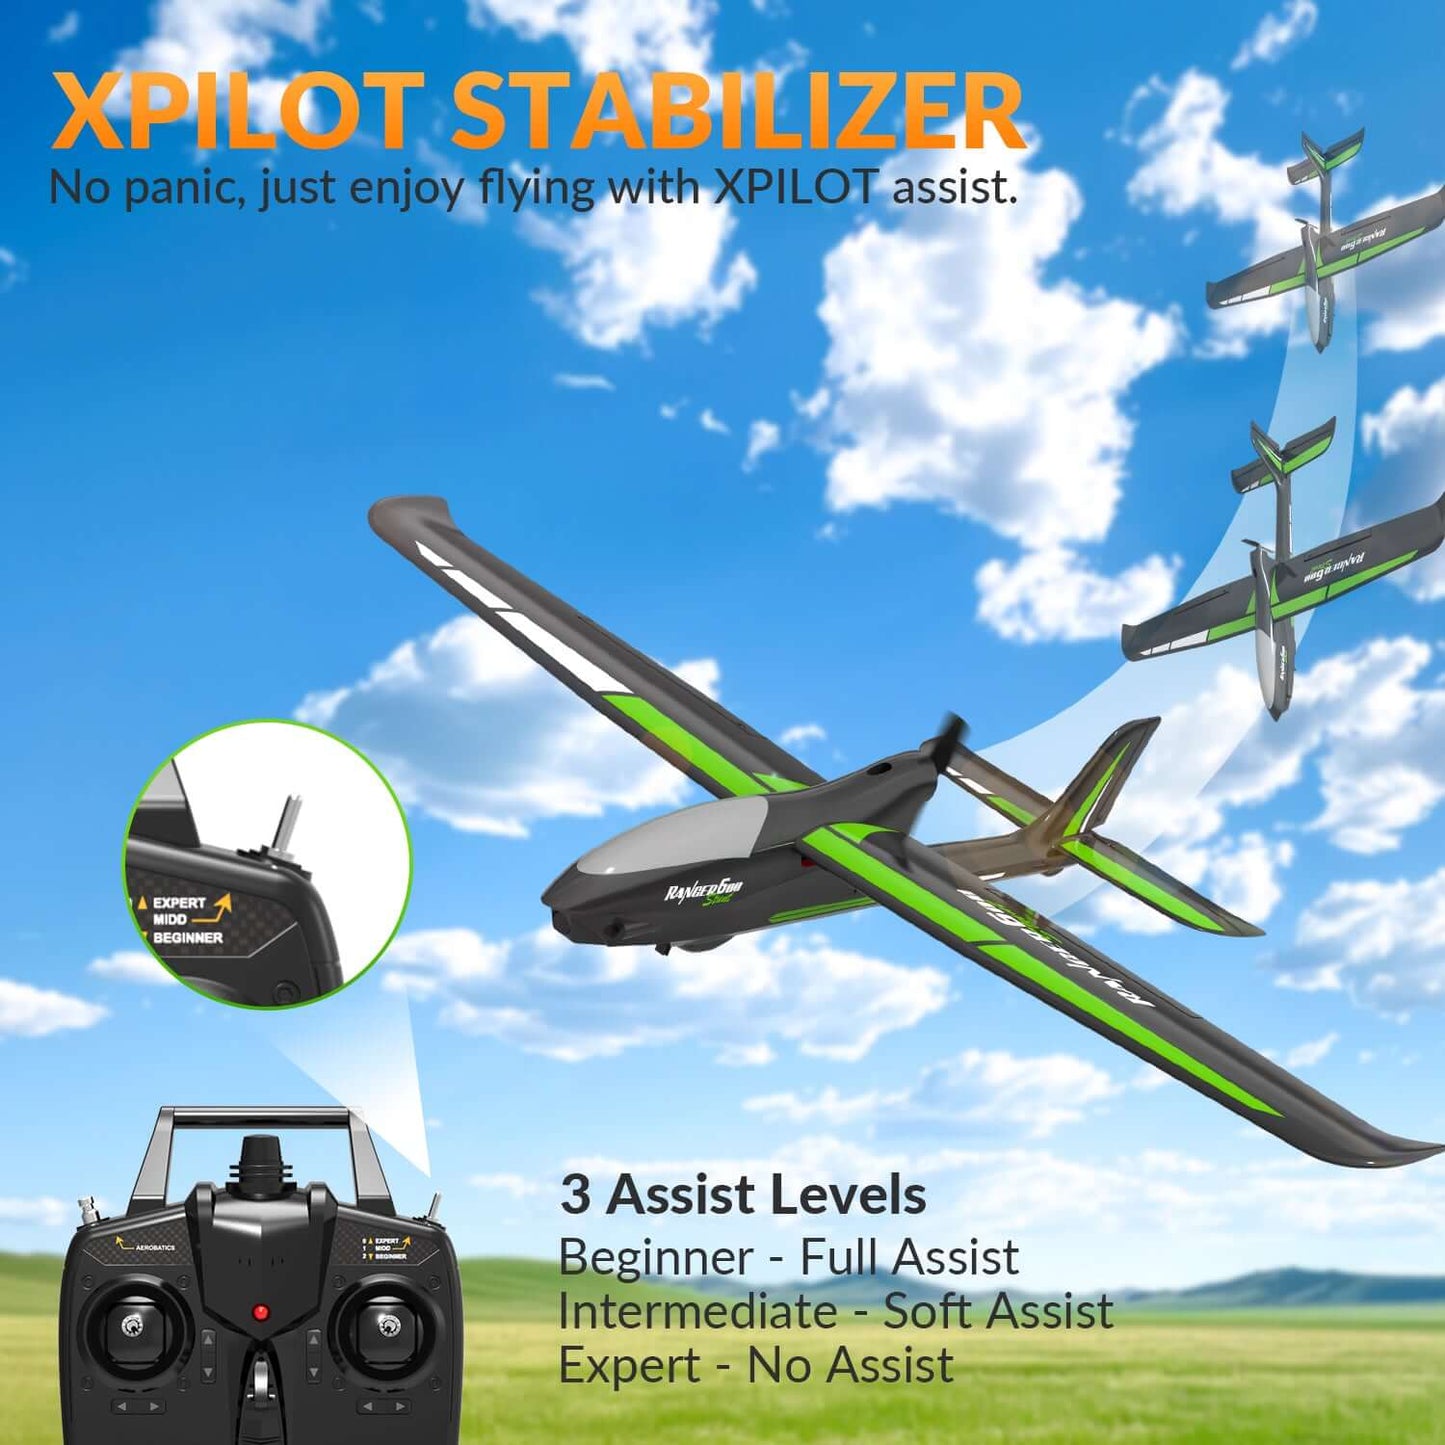 Ranger 600 RC Airplane - 4-Channel | VOLANTEXRC | KIDS TOY LOVER